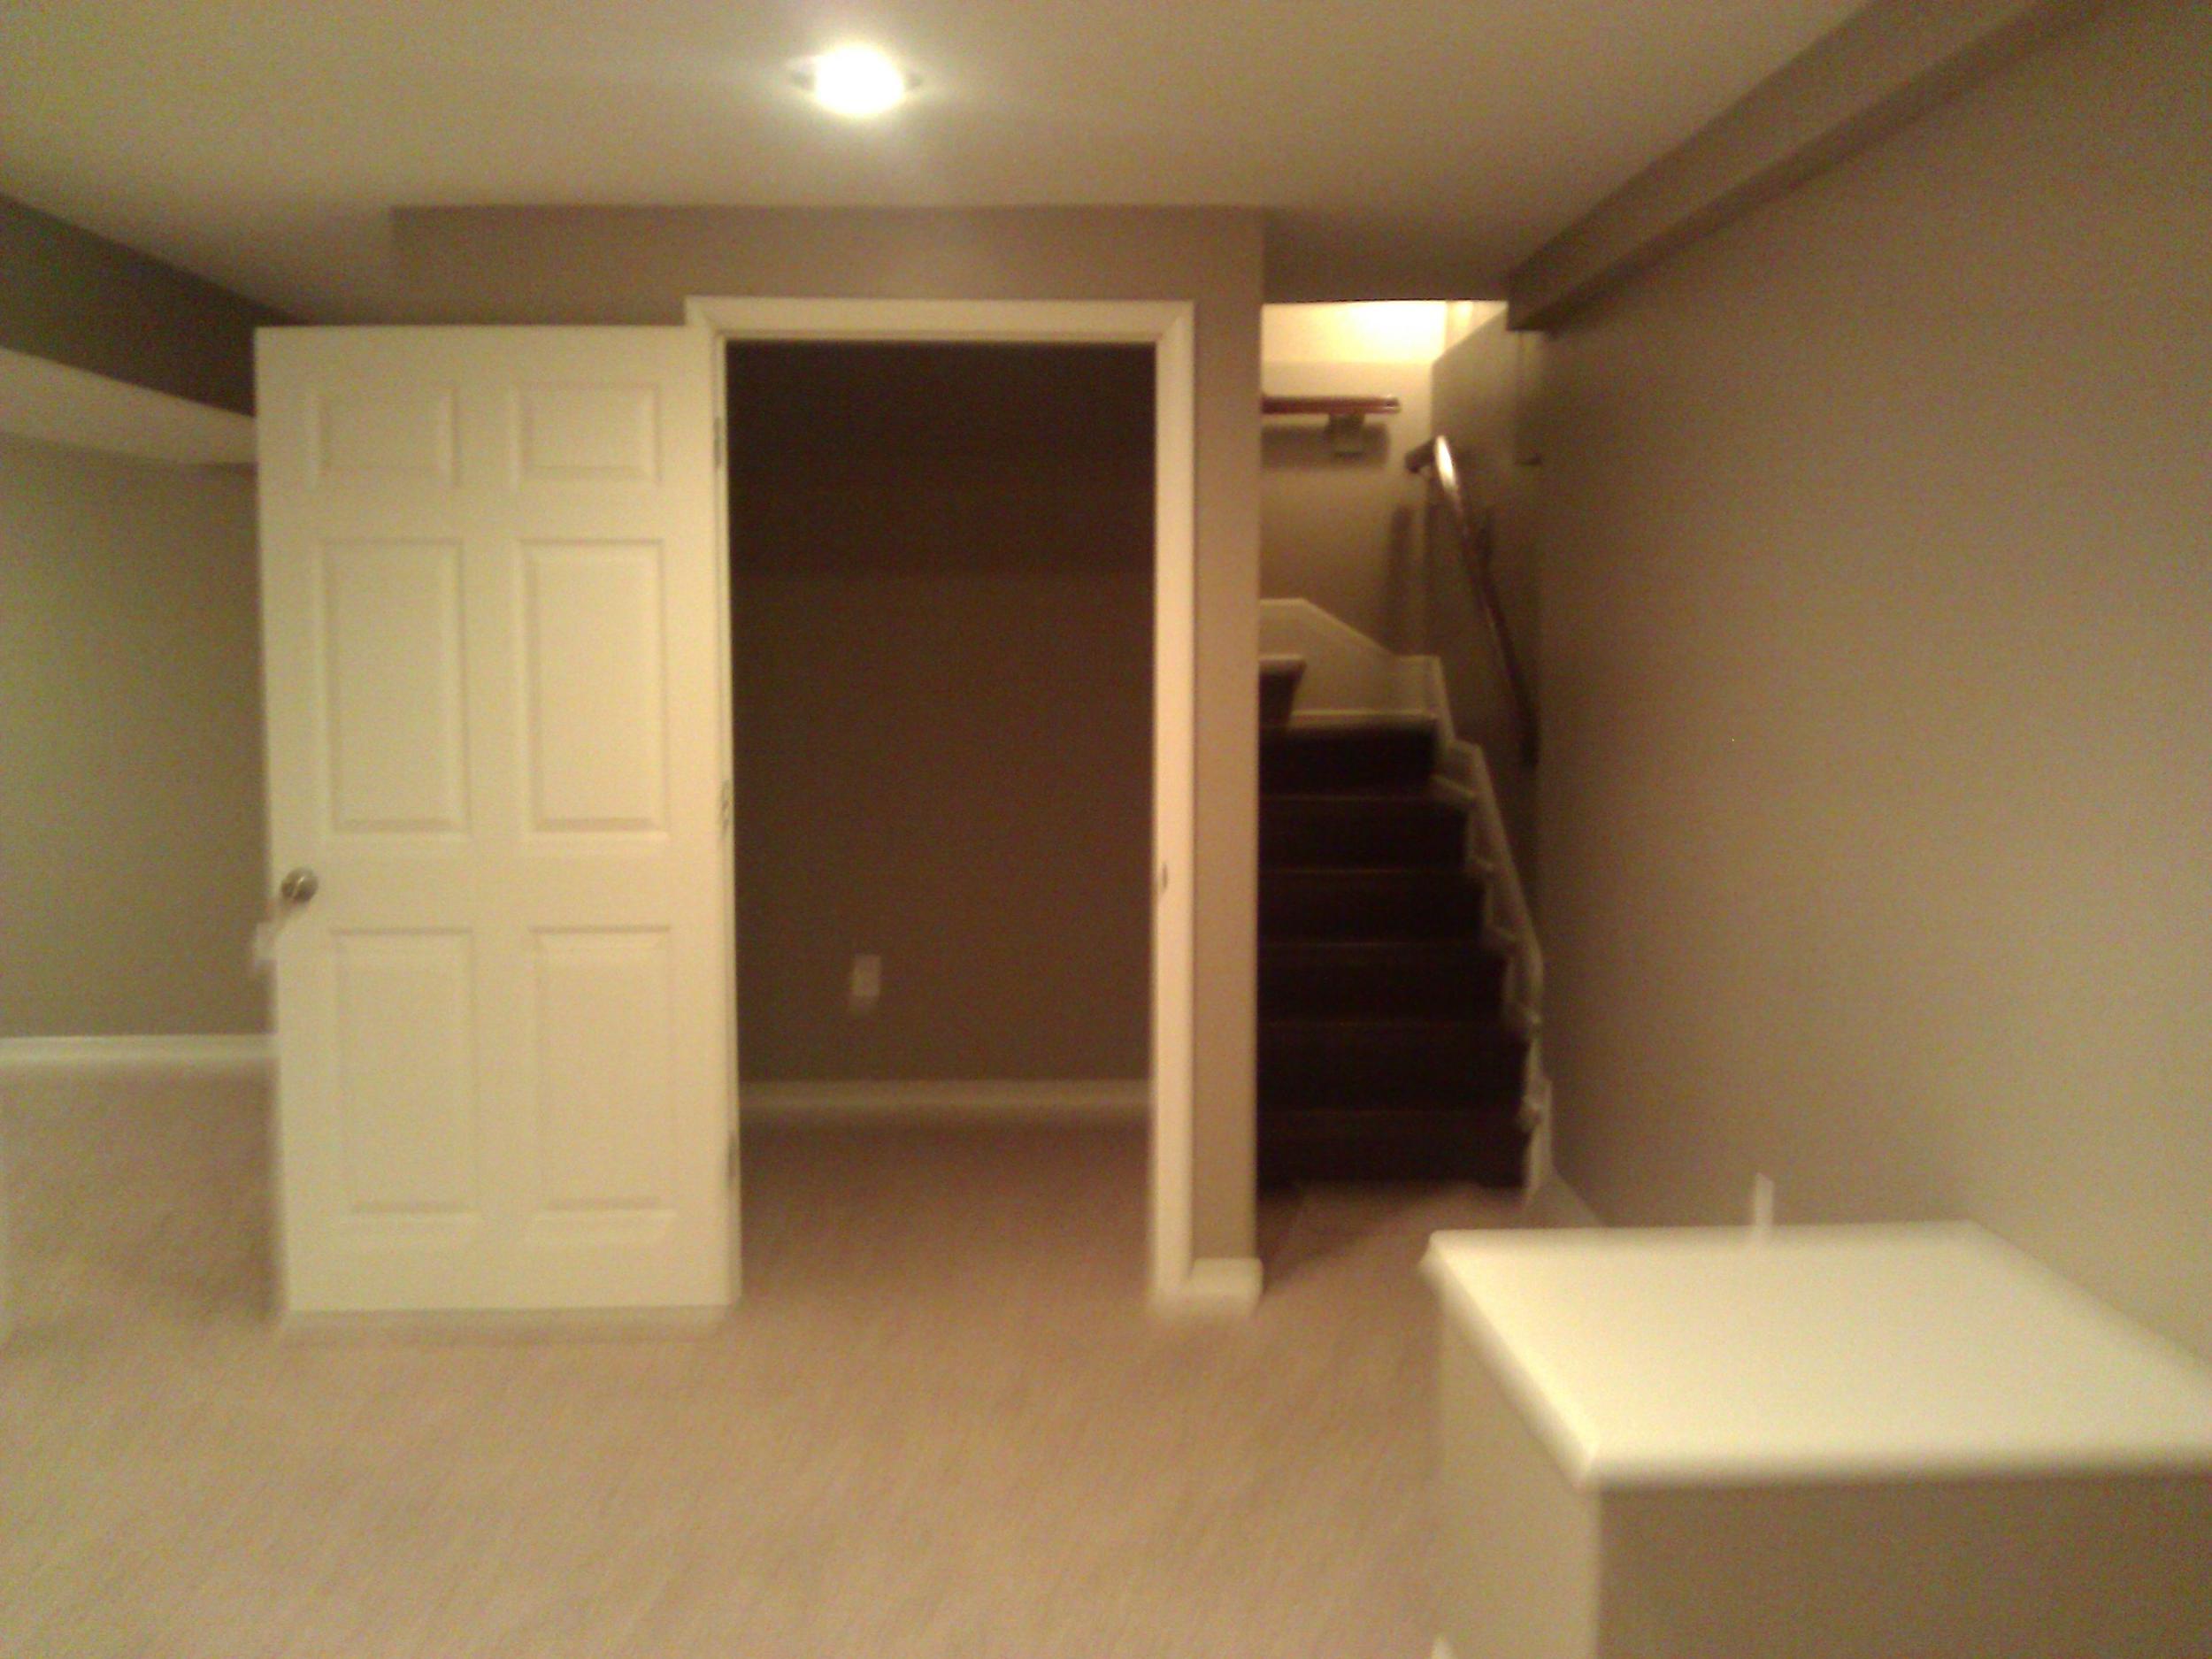 The awesome storage closet and the stairs heading up out of the basement.